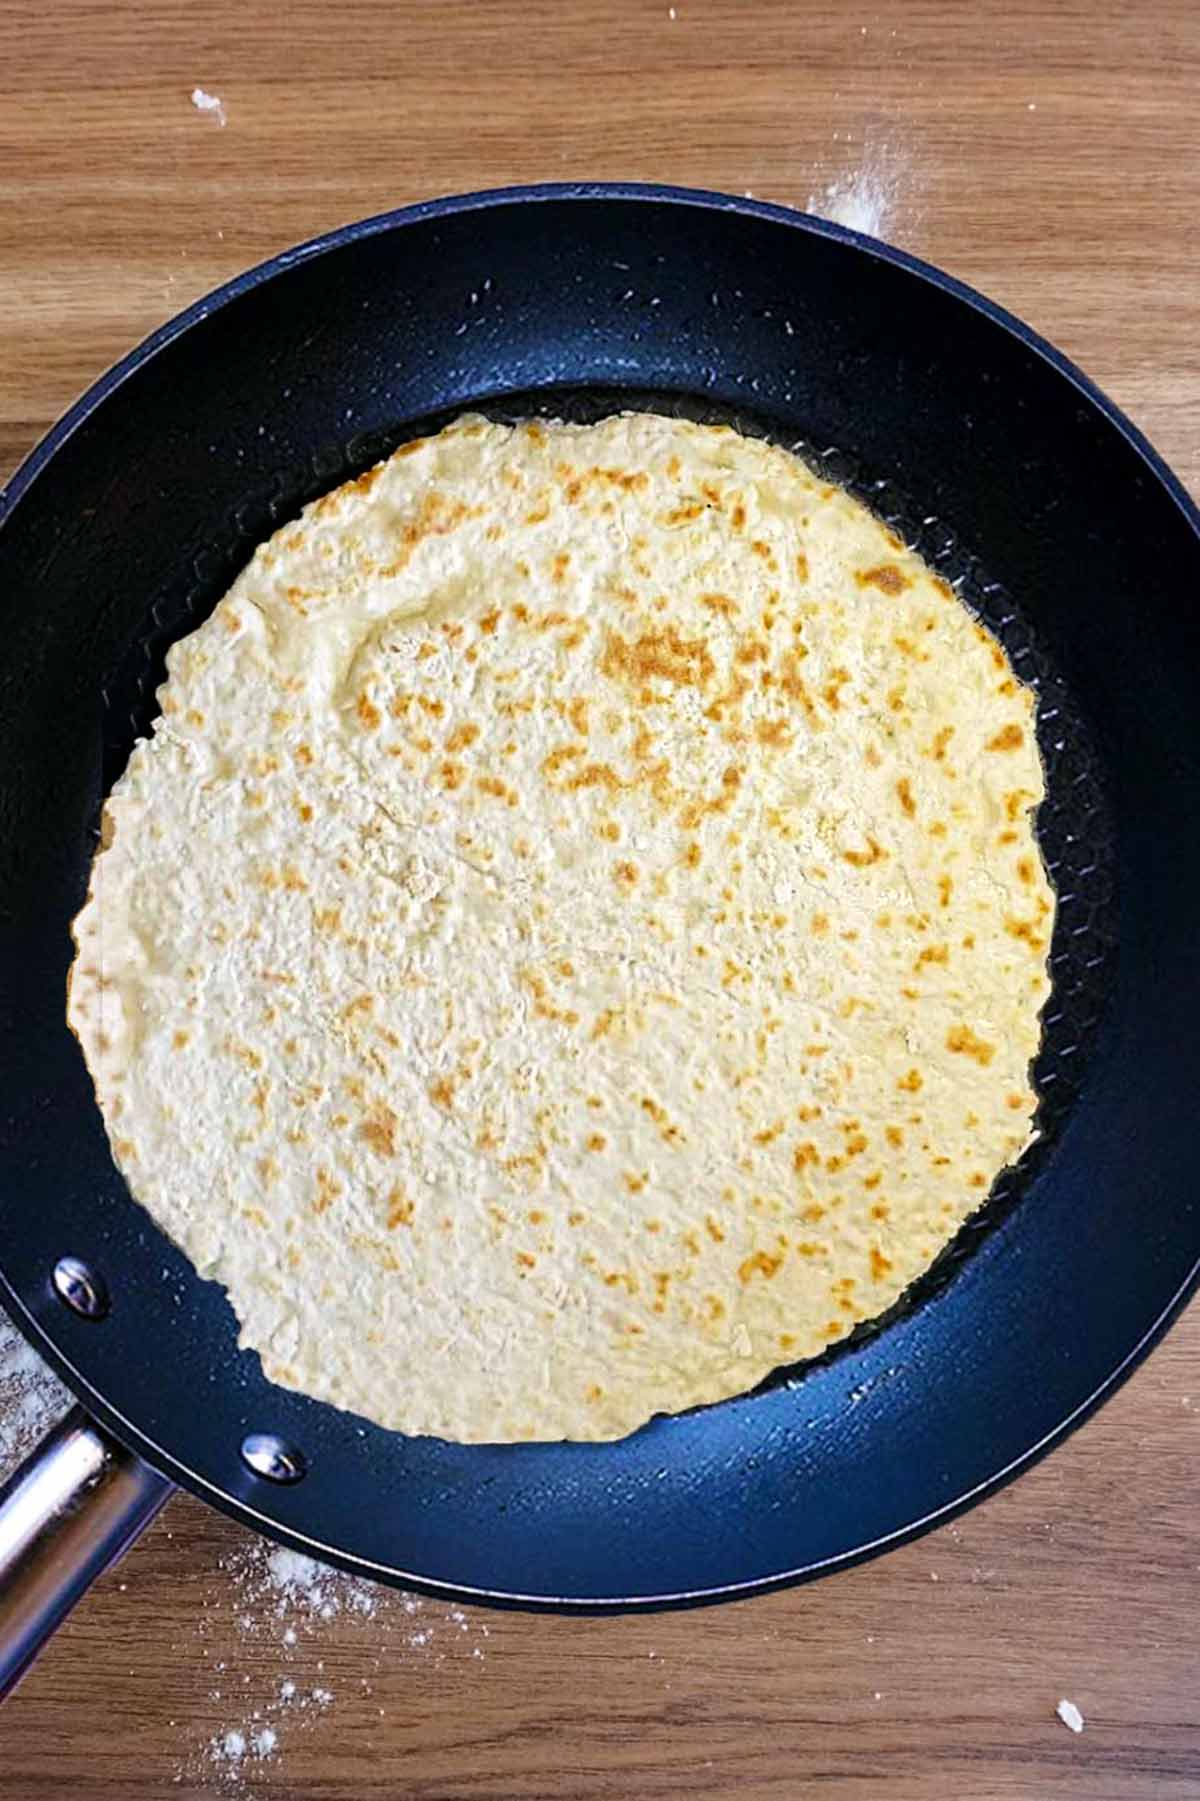 A flatbread cooking in a frying pan.